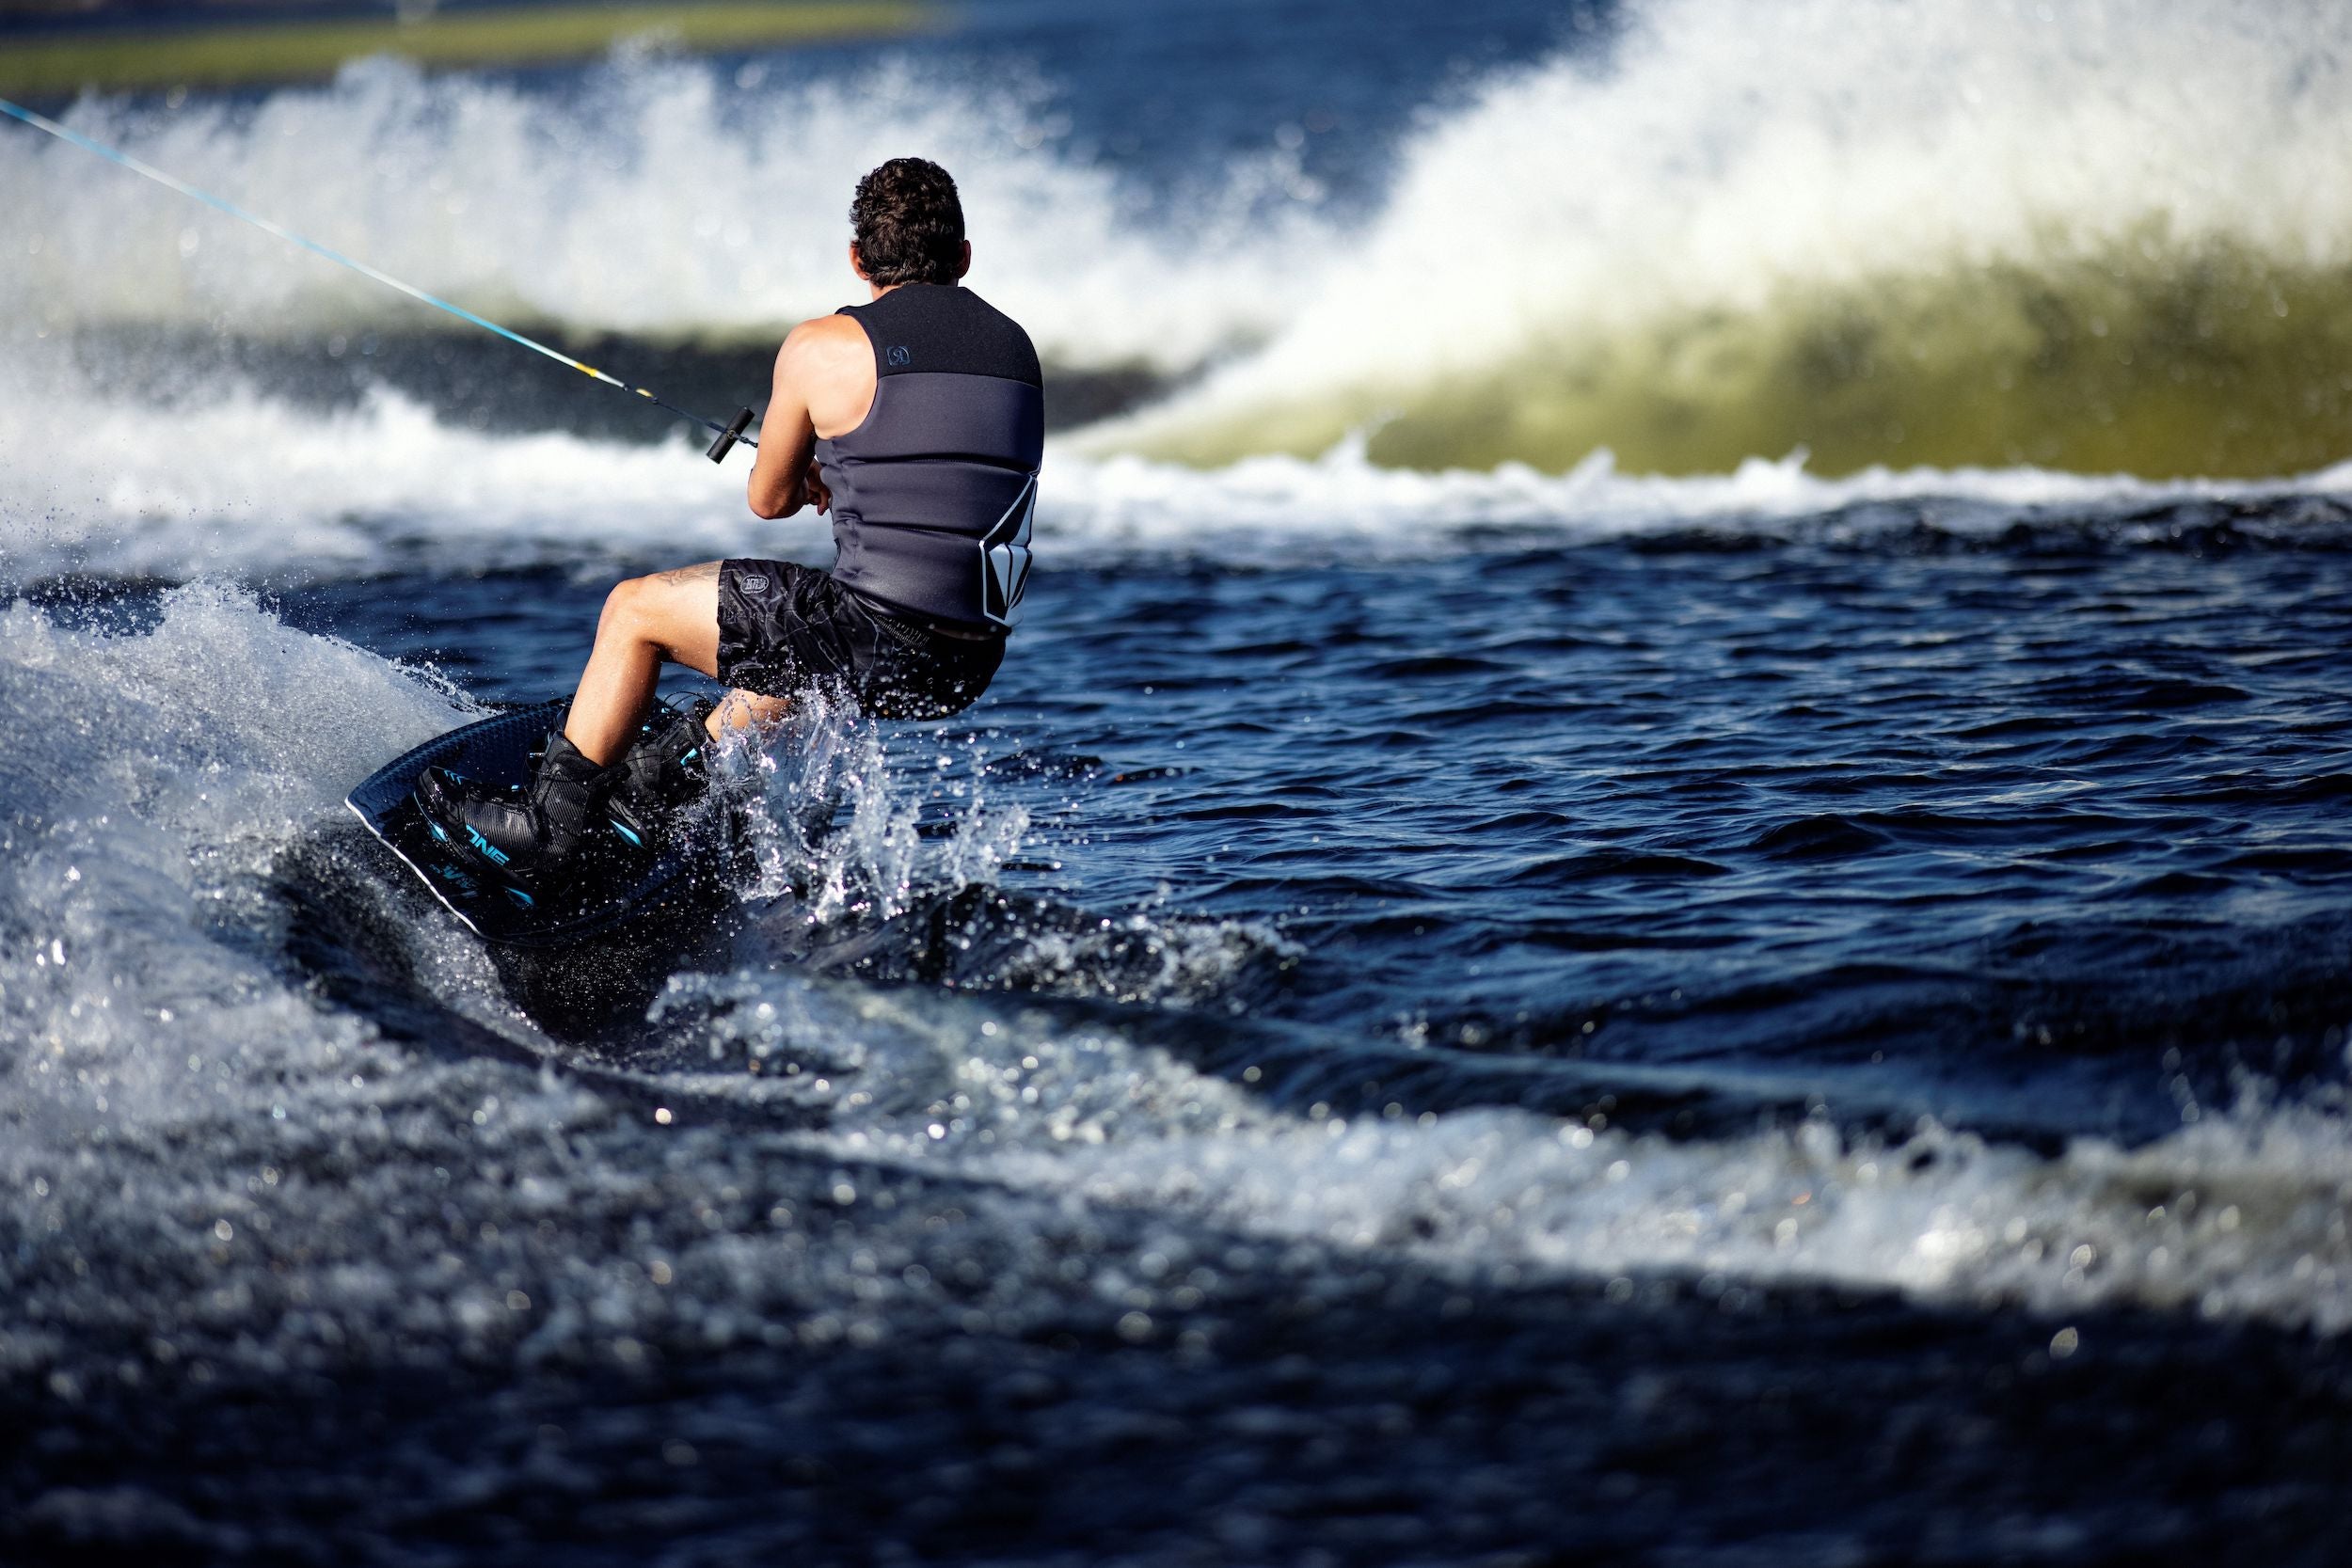 A man is water skiing on a body of water wearing Ronix 2023 One Carbitex Boots.